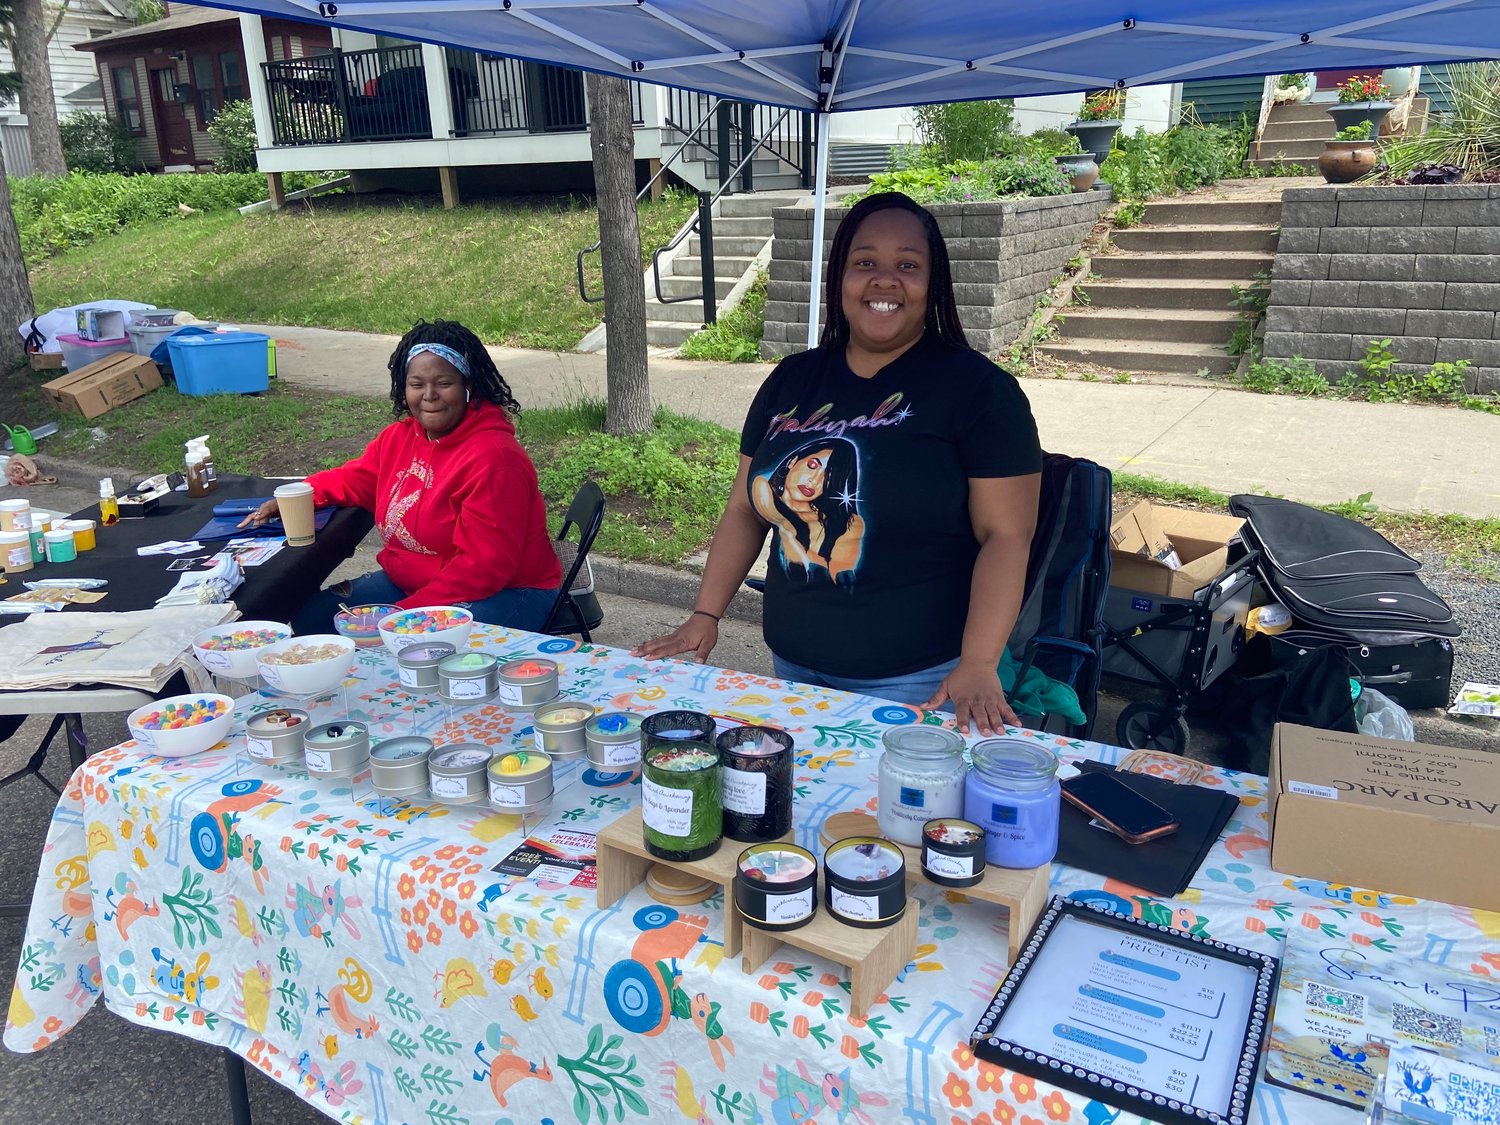 Jasmine Seward, owner of Blackbird Awakening, said, “I started my business based off of my hobby back in 2020. I get to interact with so many different people from all walks of life and showing what I made to others makes me feel good.”